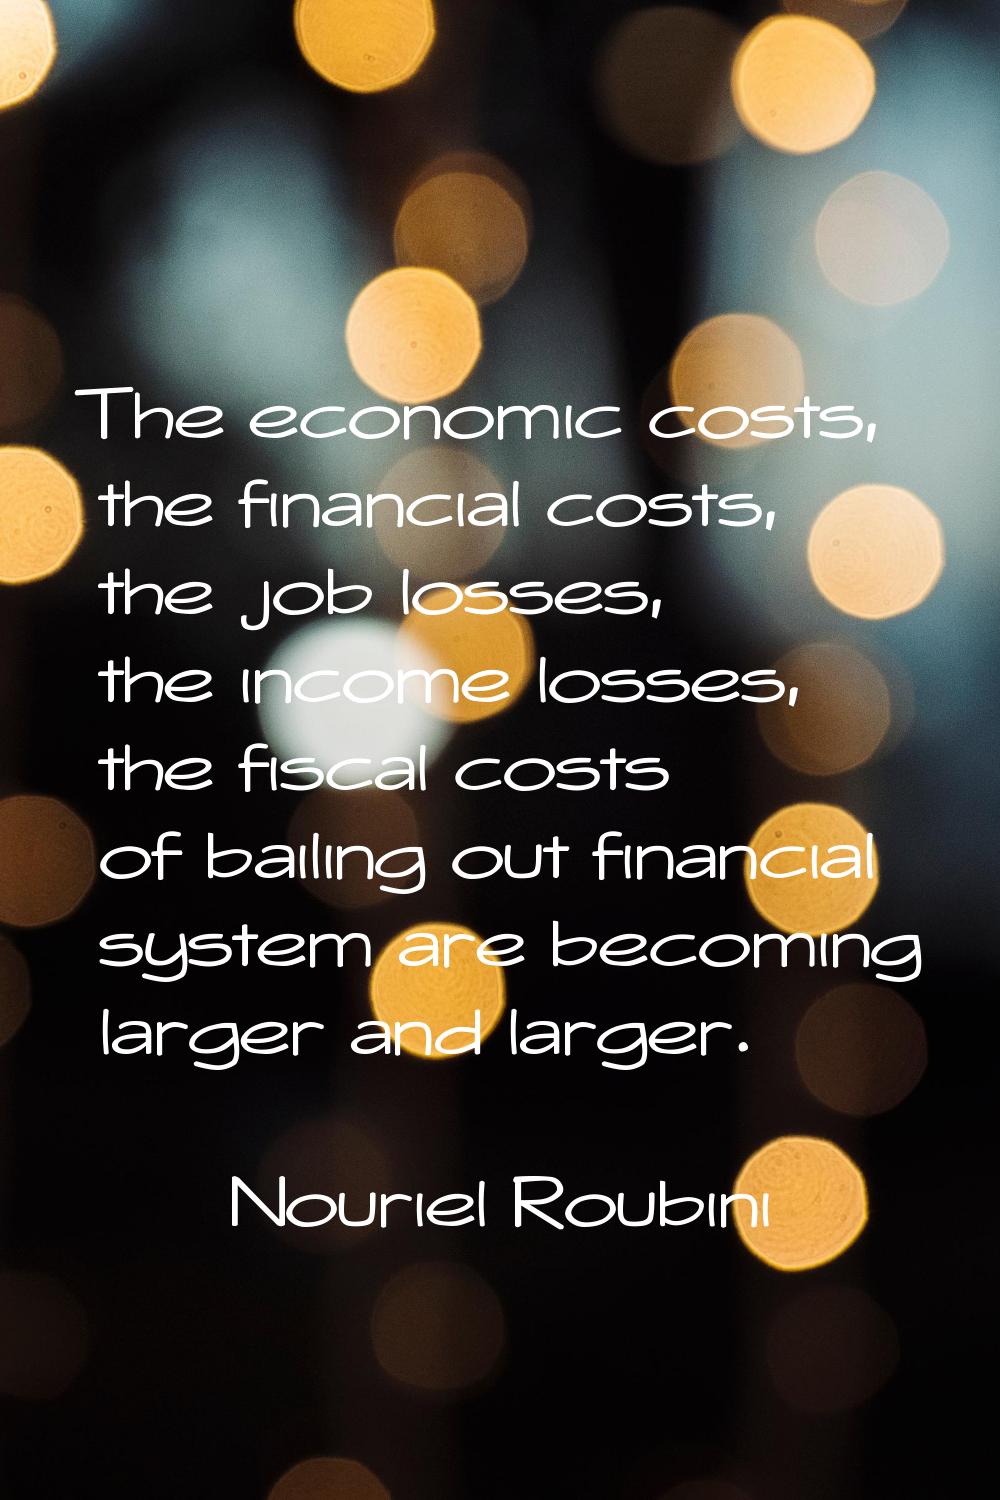 The economic costs, the financial costs, the job losses, the income losses, the fiscal costs of bai